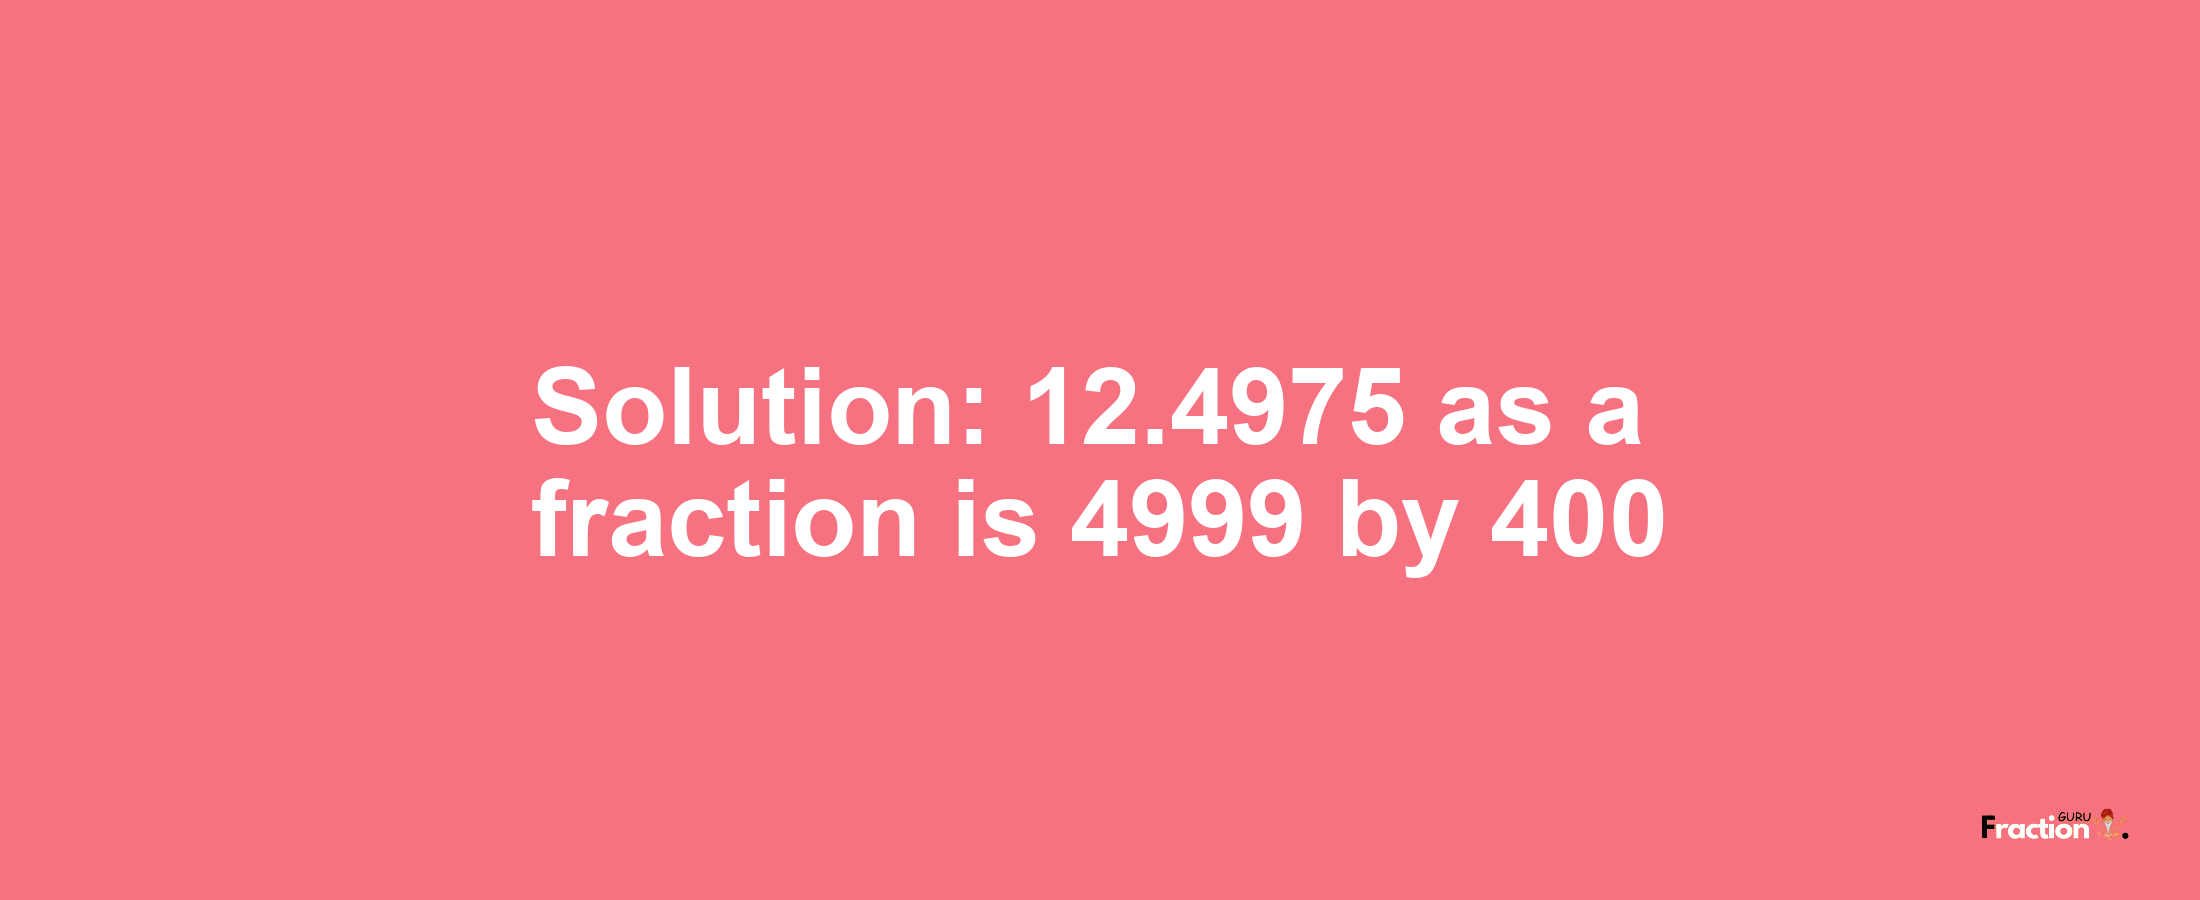 Solution:12.4975 as a fraction is 4999/400